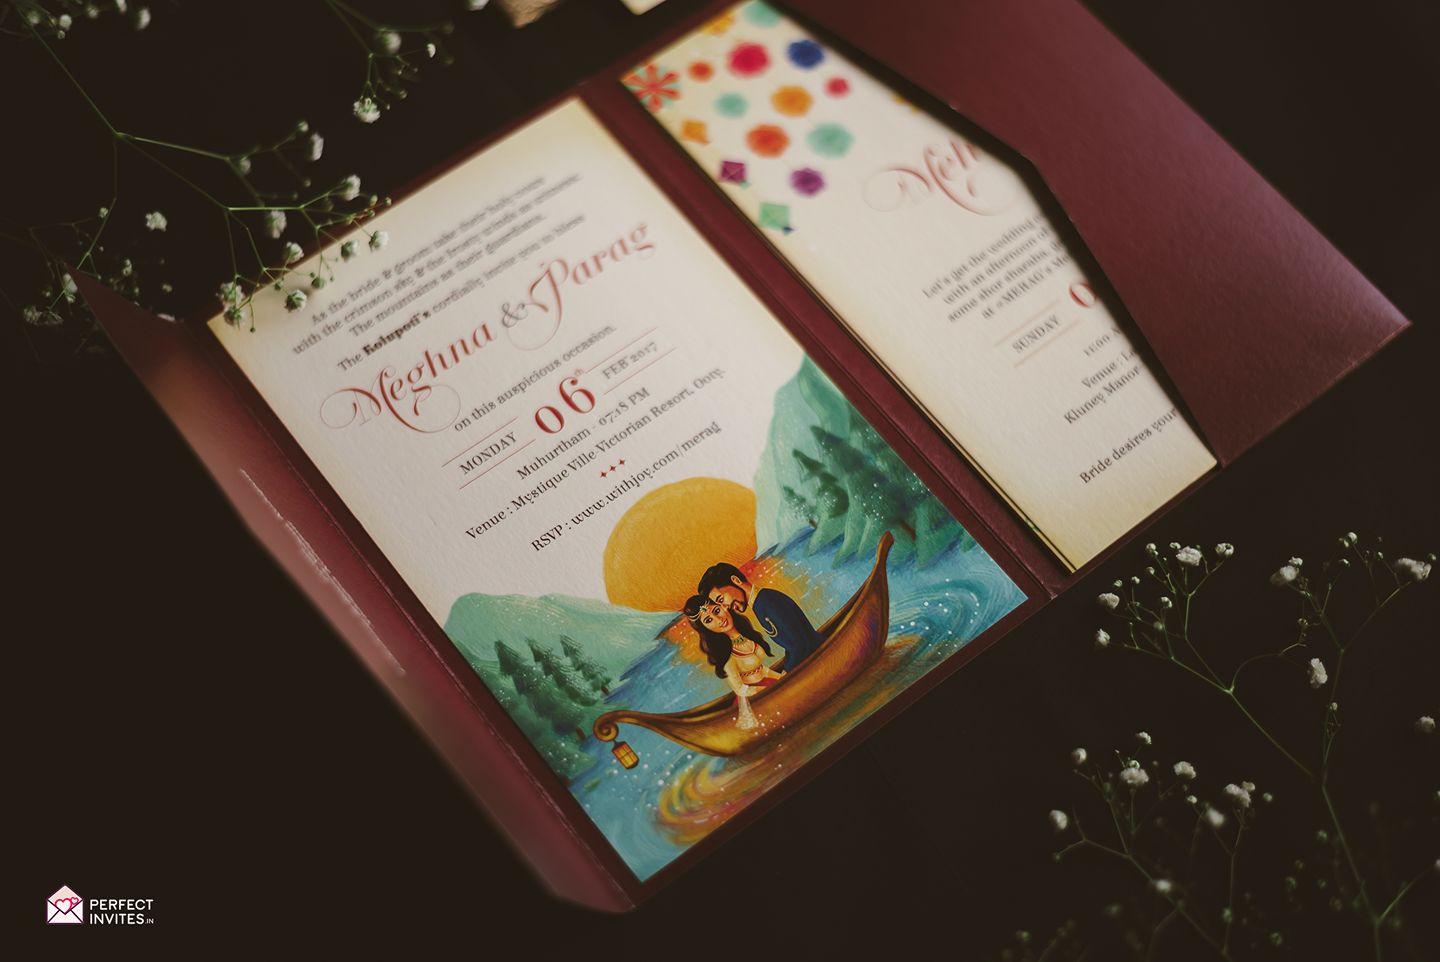 Top 10 Animated Wedding Invitation Creators That Have Our Heart